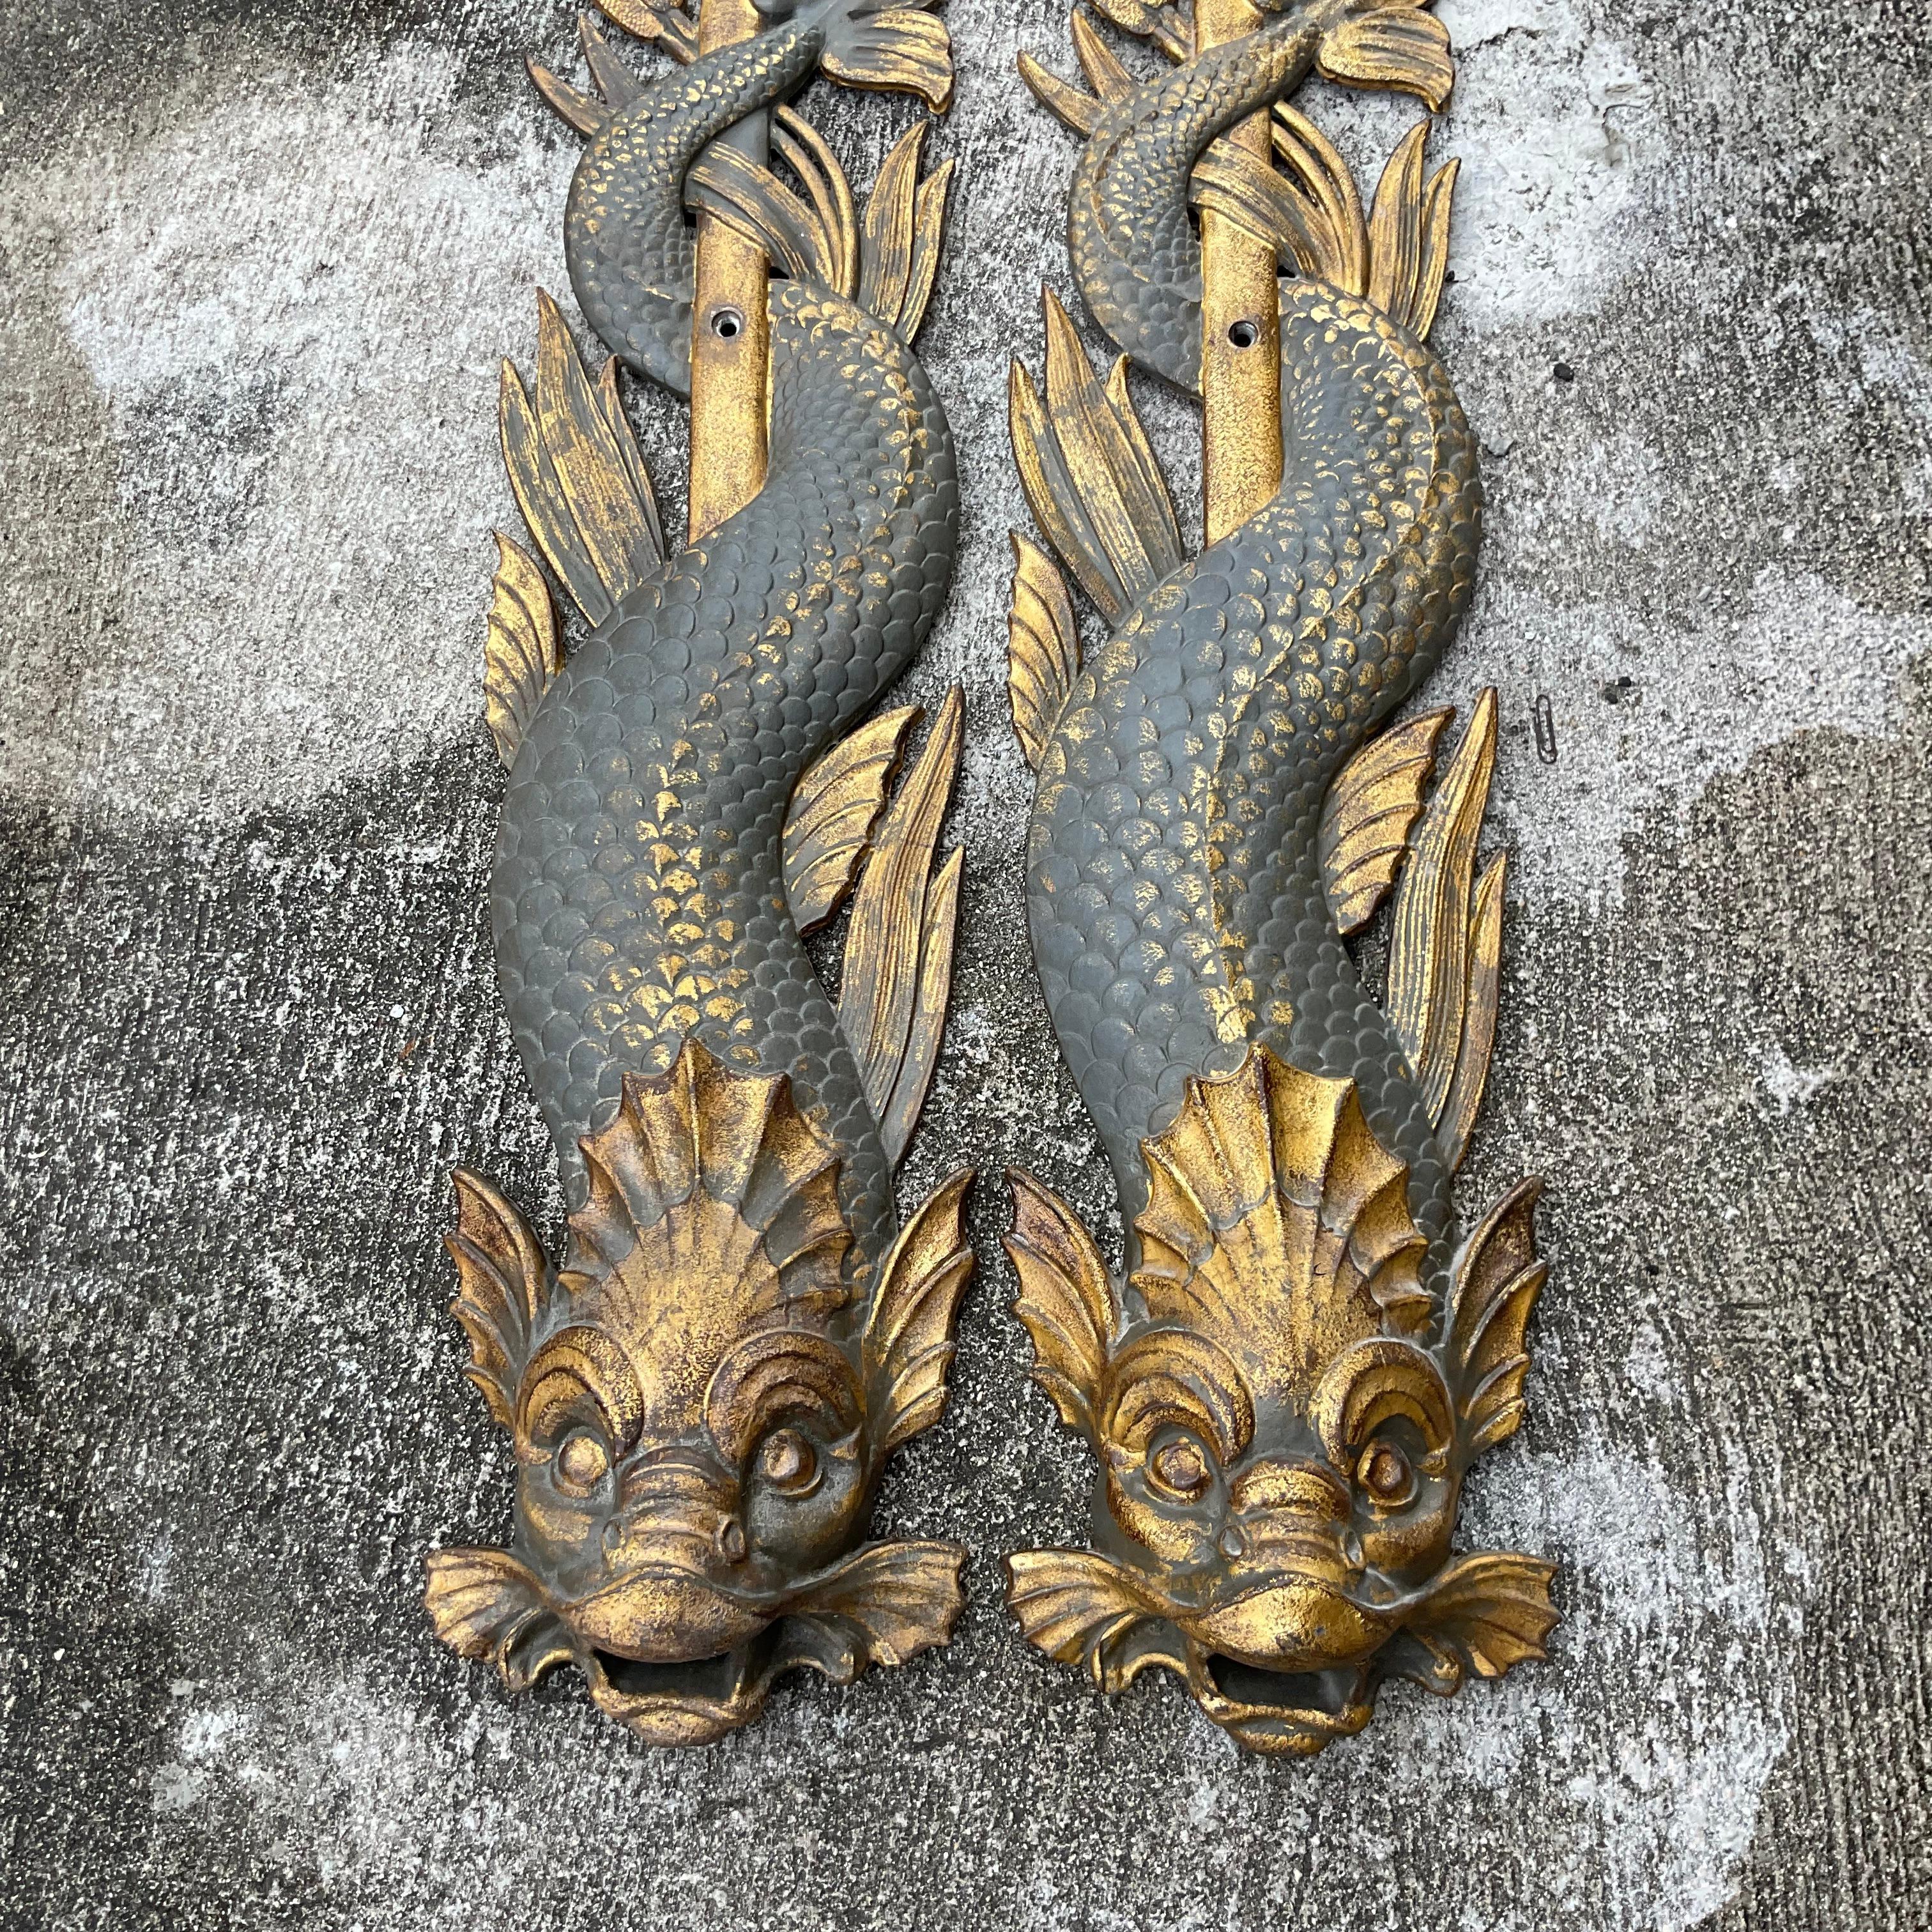 American Vintage Boho Painted Iron Serpent Wall Spouts - a Pair